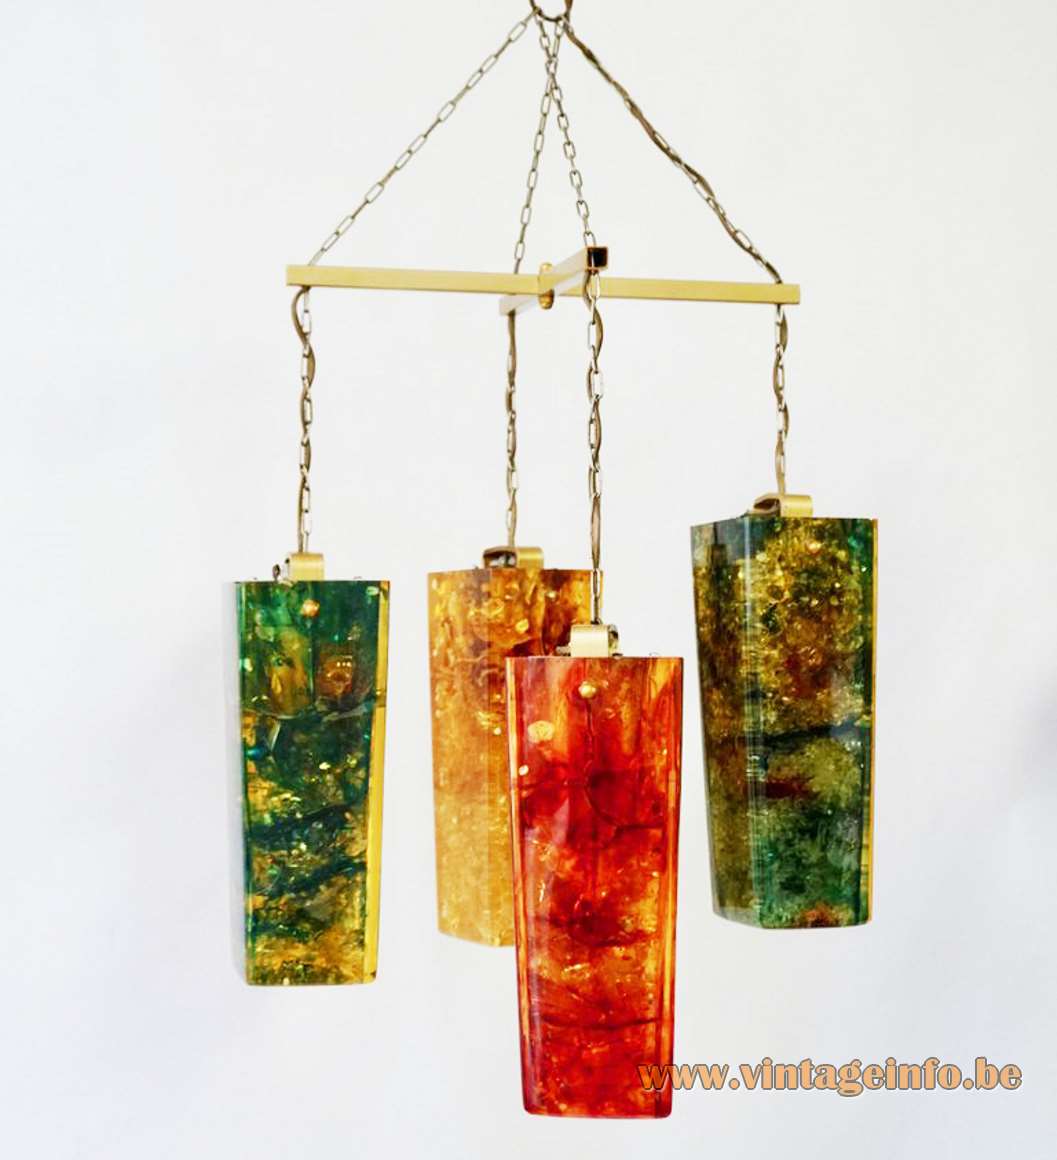 Pierre Giraudon fractal resin shatterline chandelier green yellow orange red conical beams brass chain 1970s France